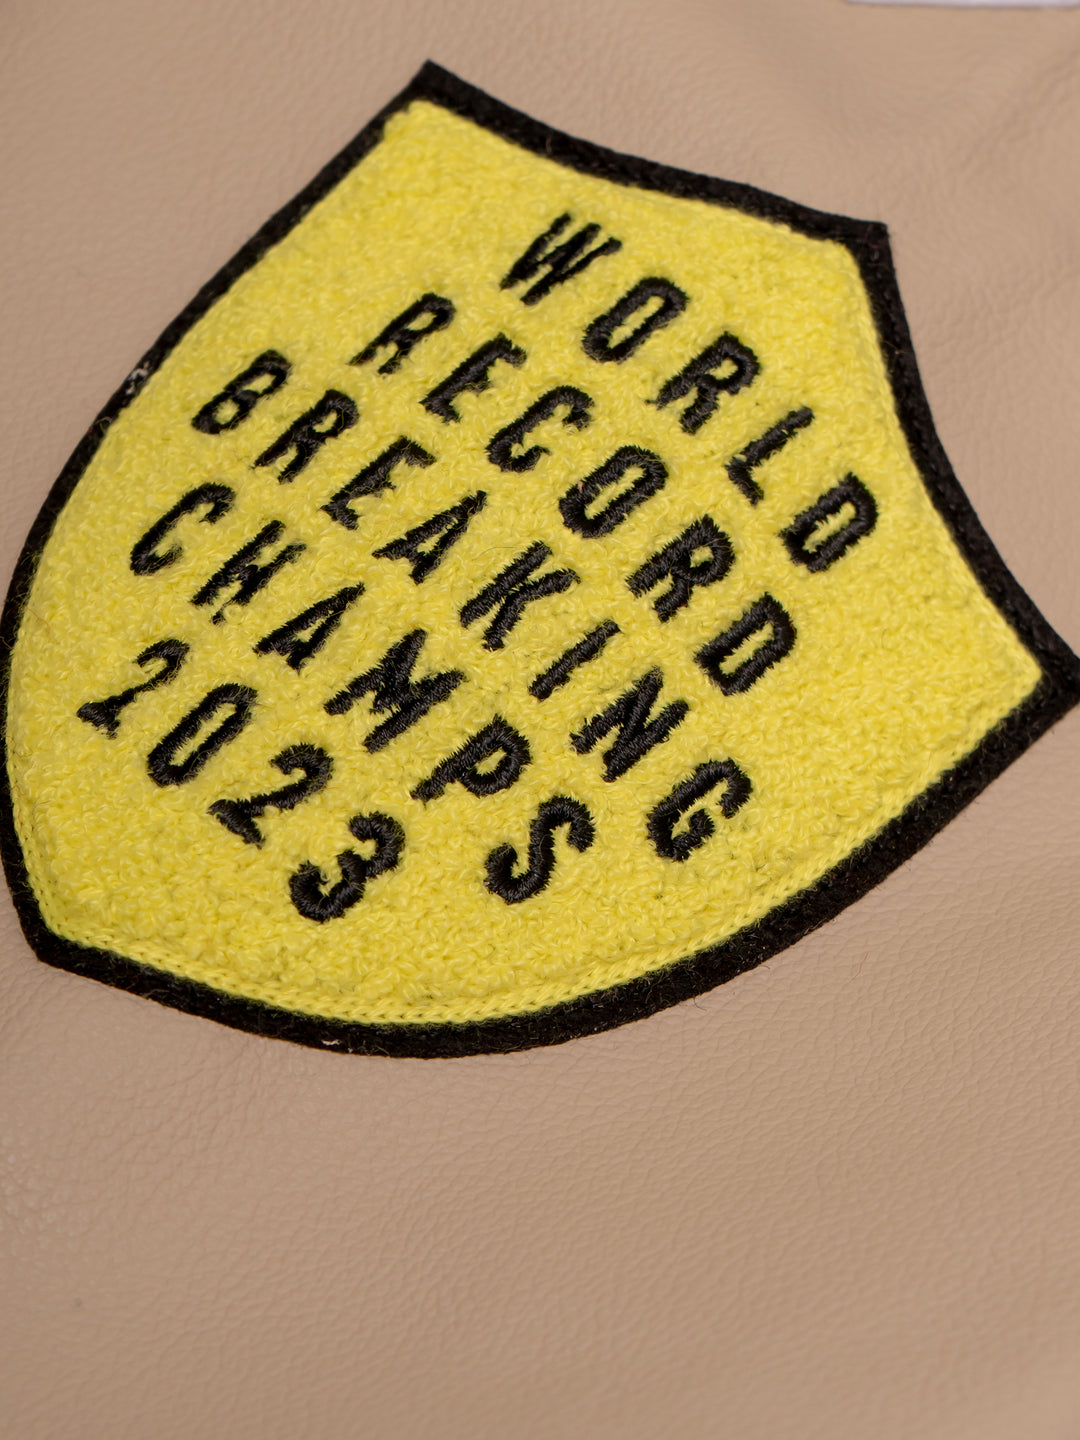 close up of a yellow patch on the sleeve of the jacket